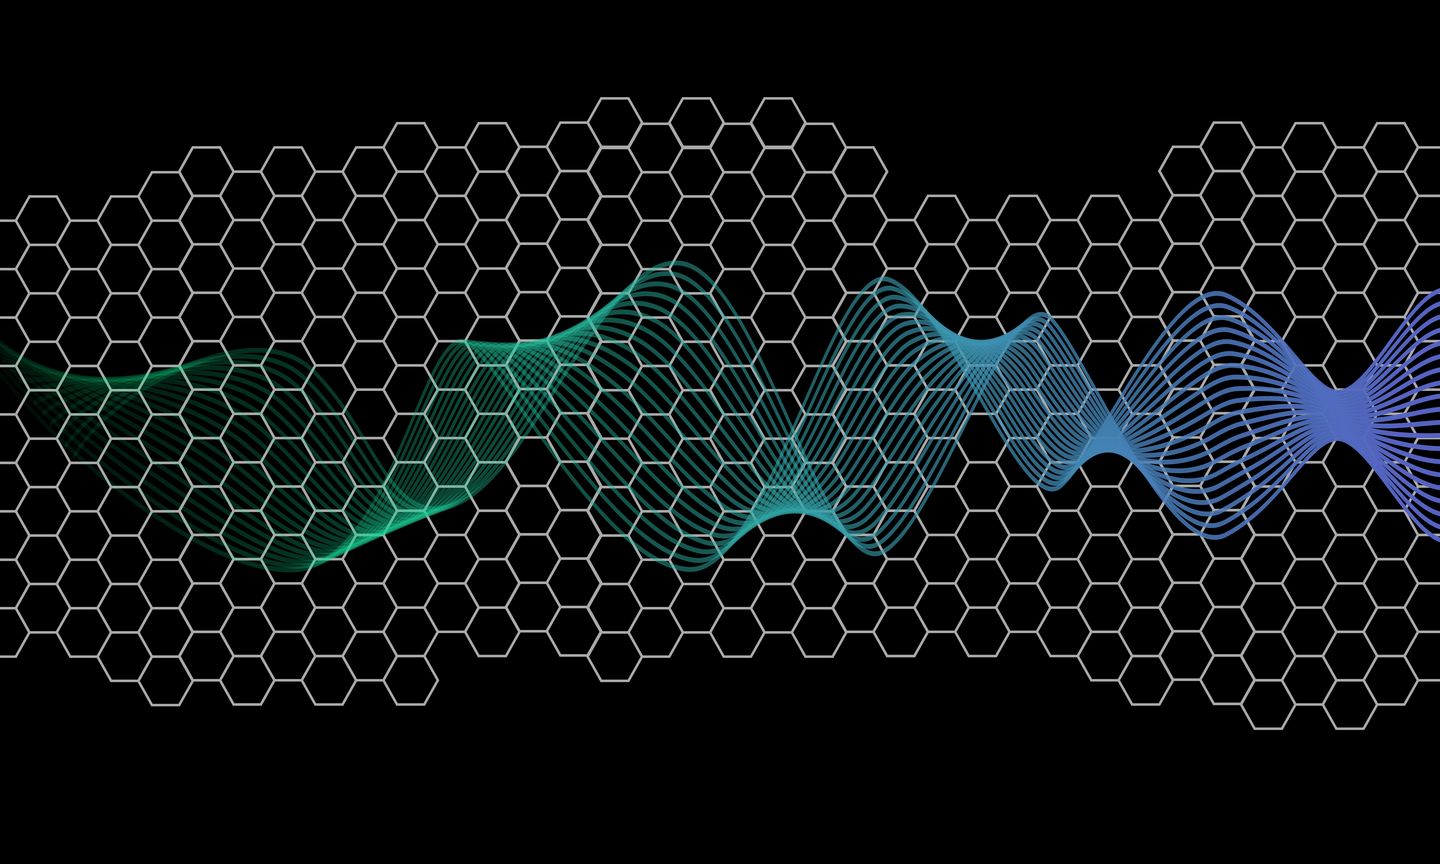 The hexagon lattice is characteristic of graphene, the wave symbolizes the movement of the electrons